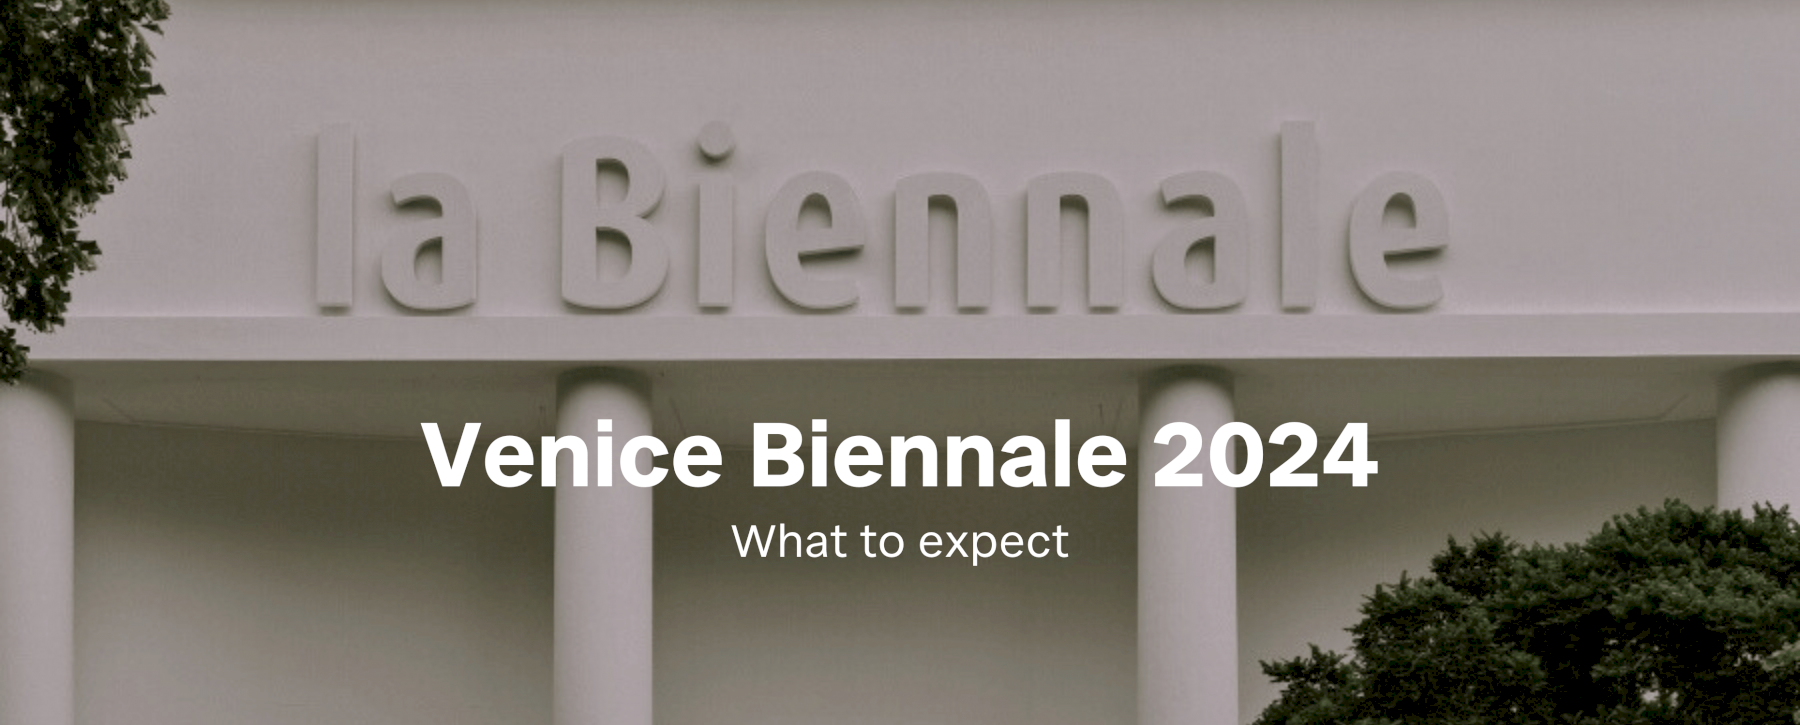 Venice Biennale 2024: What to expect